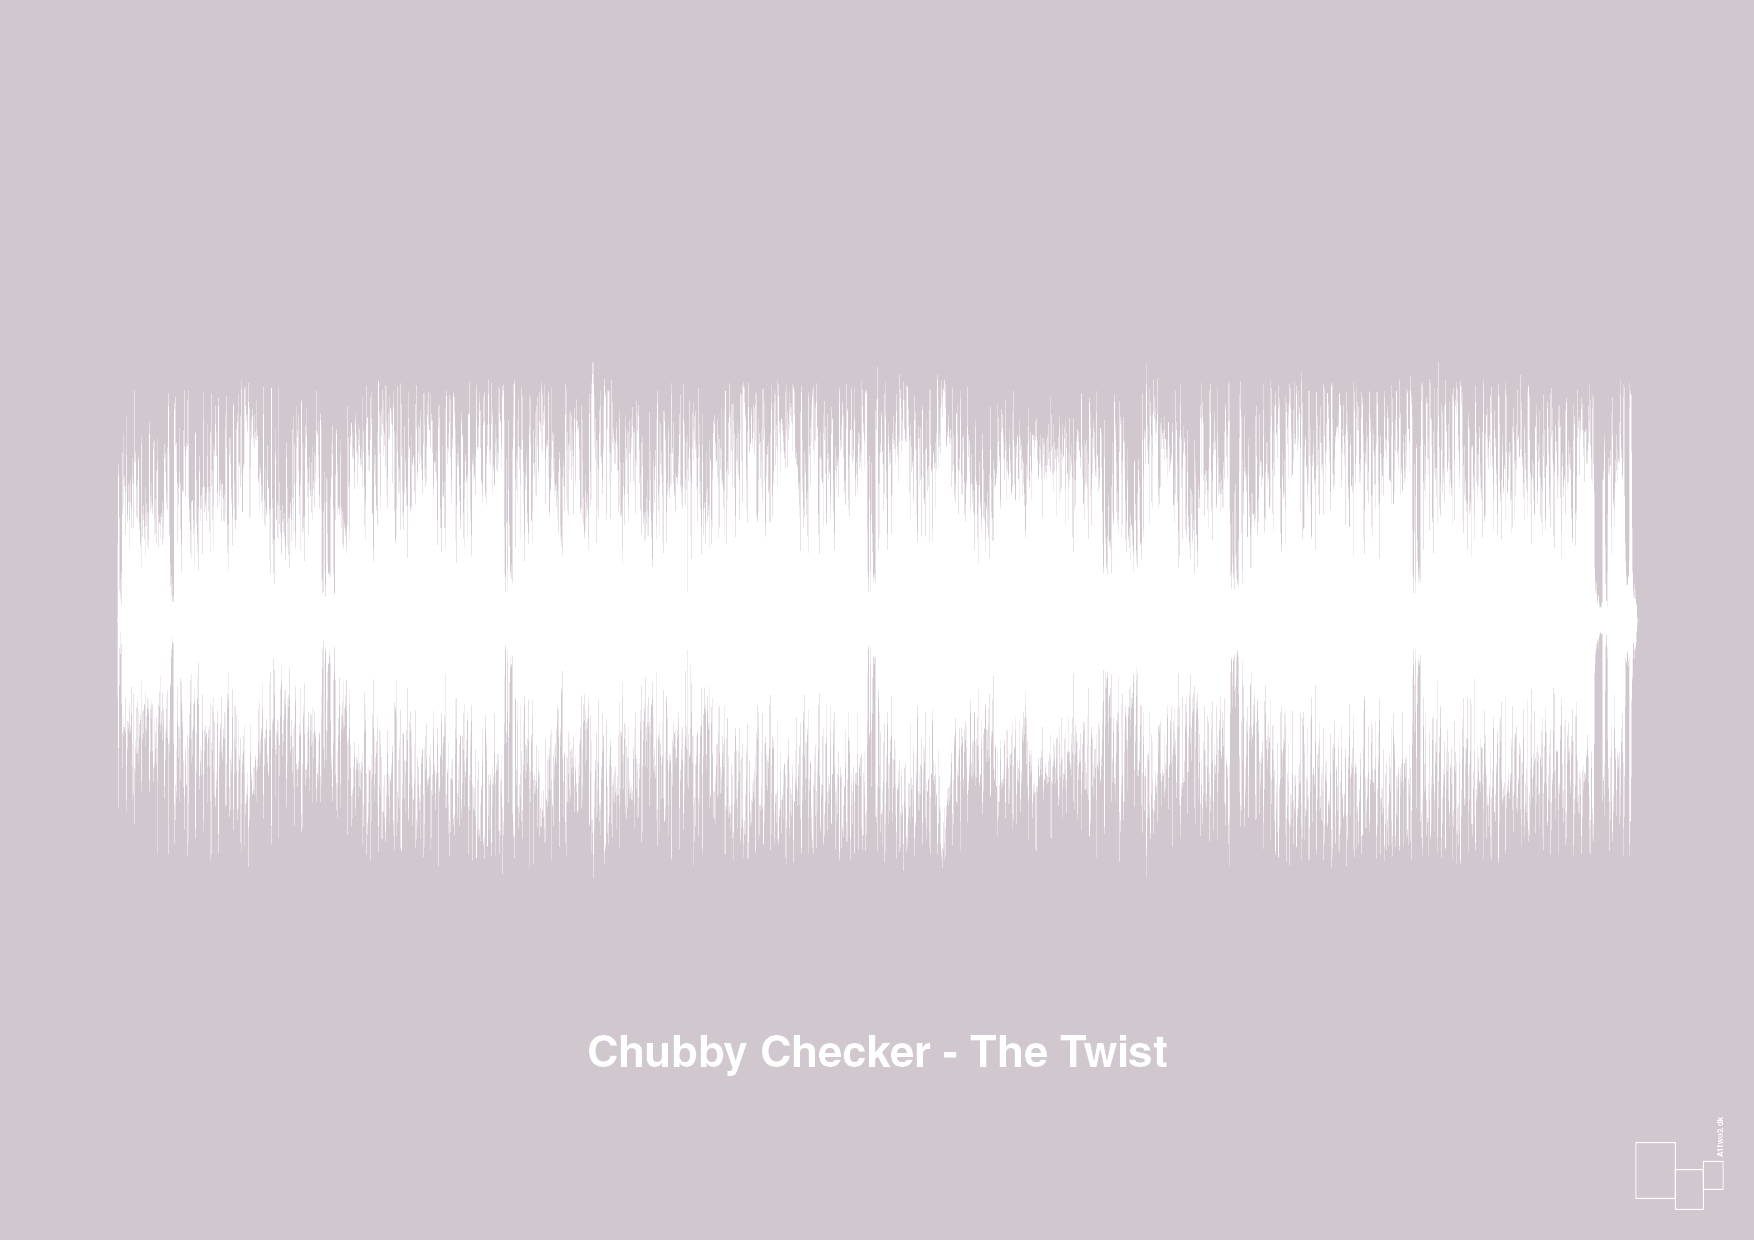 chubby checker - the twist - Plakat med Musik i Dusty Lilac